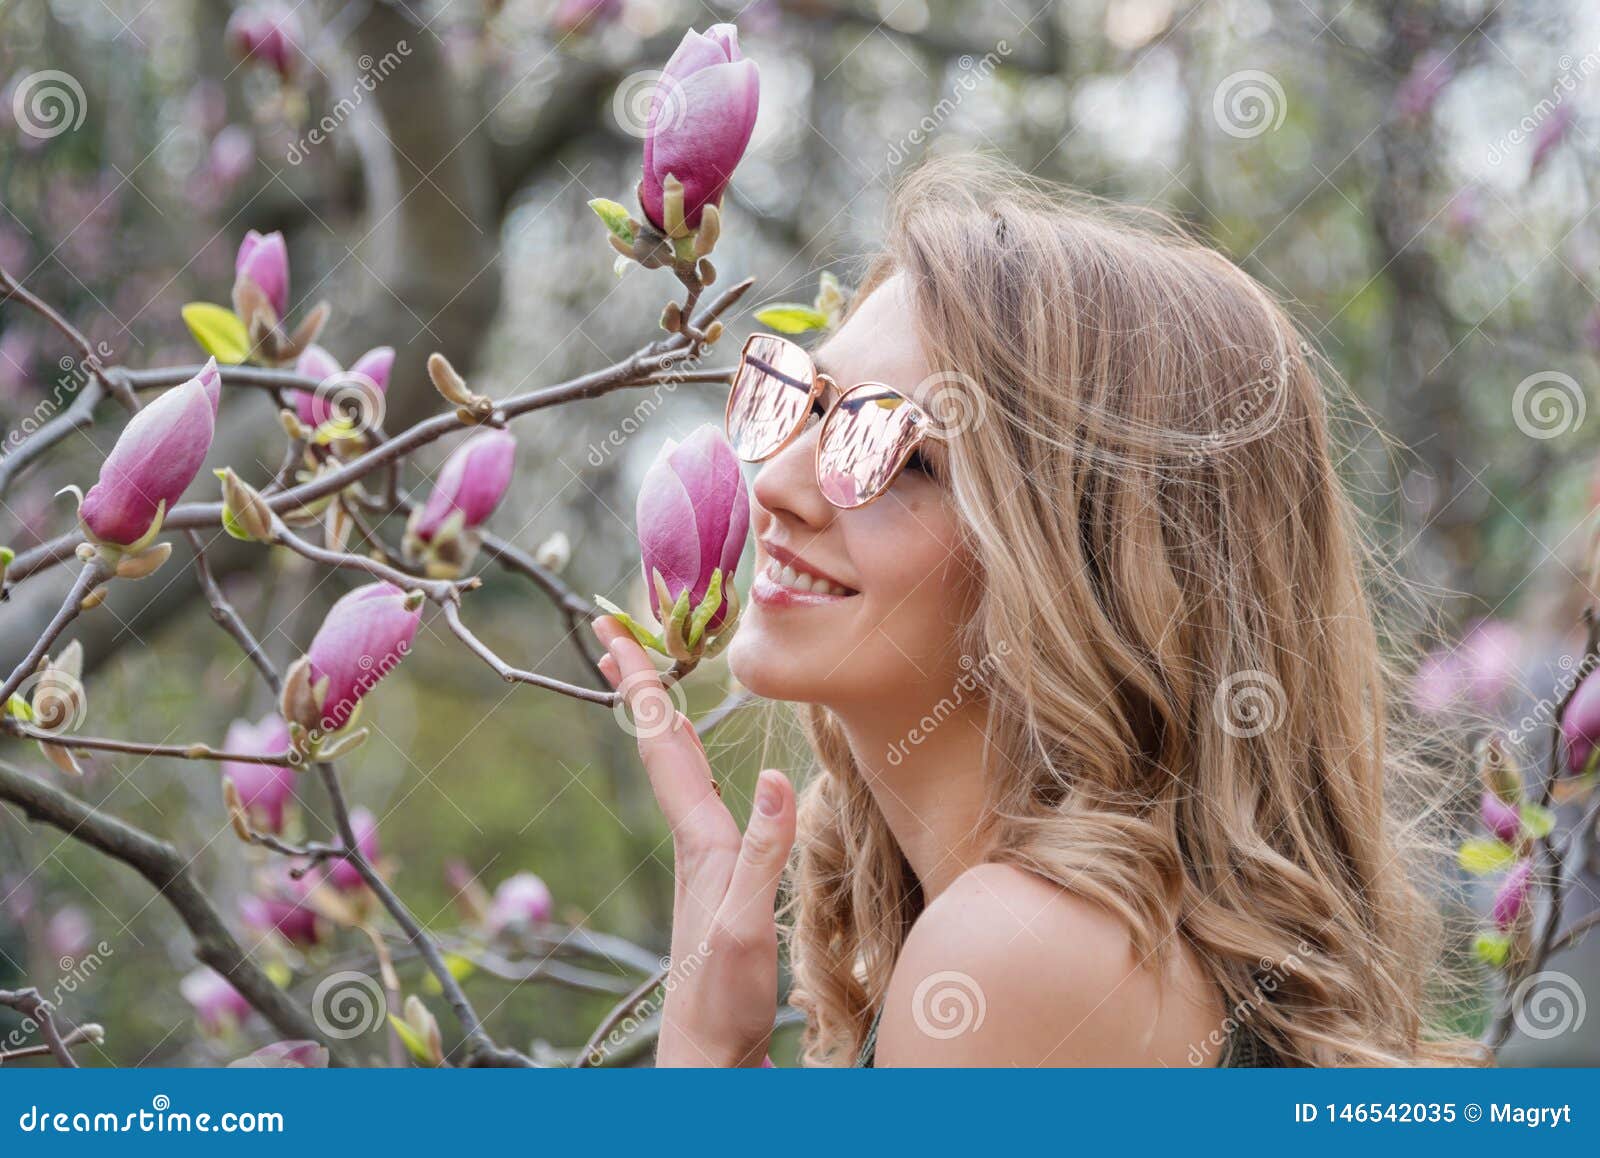 Young Blonde Woman Near Blossoming Magnolia Flowers Tree In Spring Park On Sunny Day Magnolia